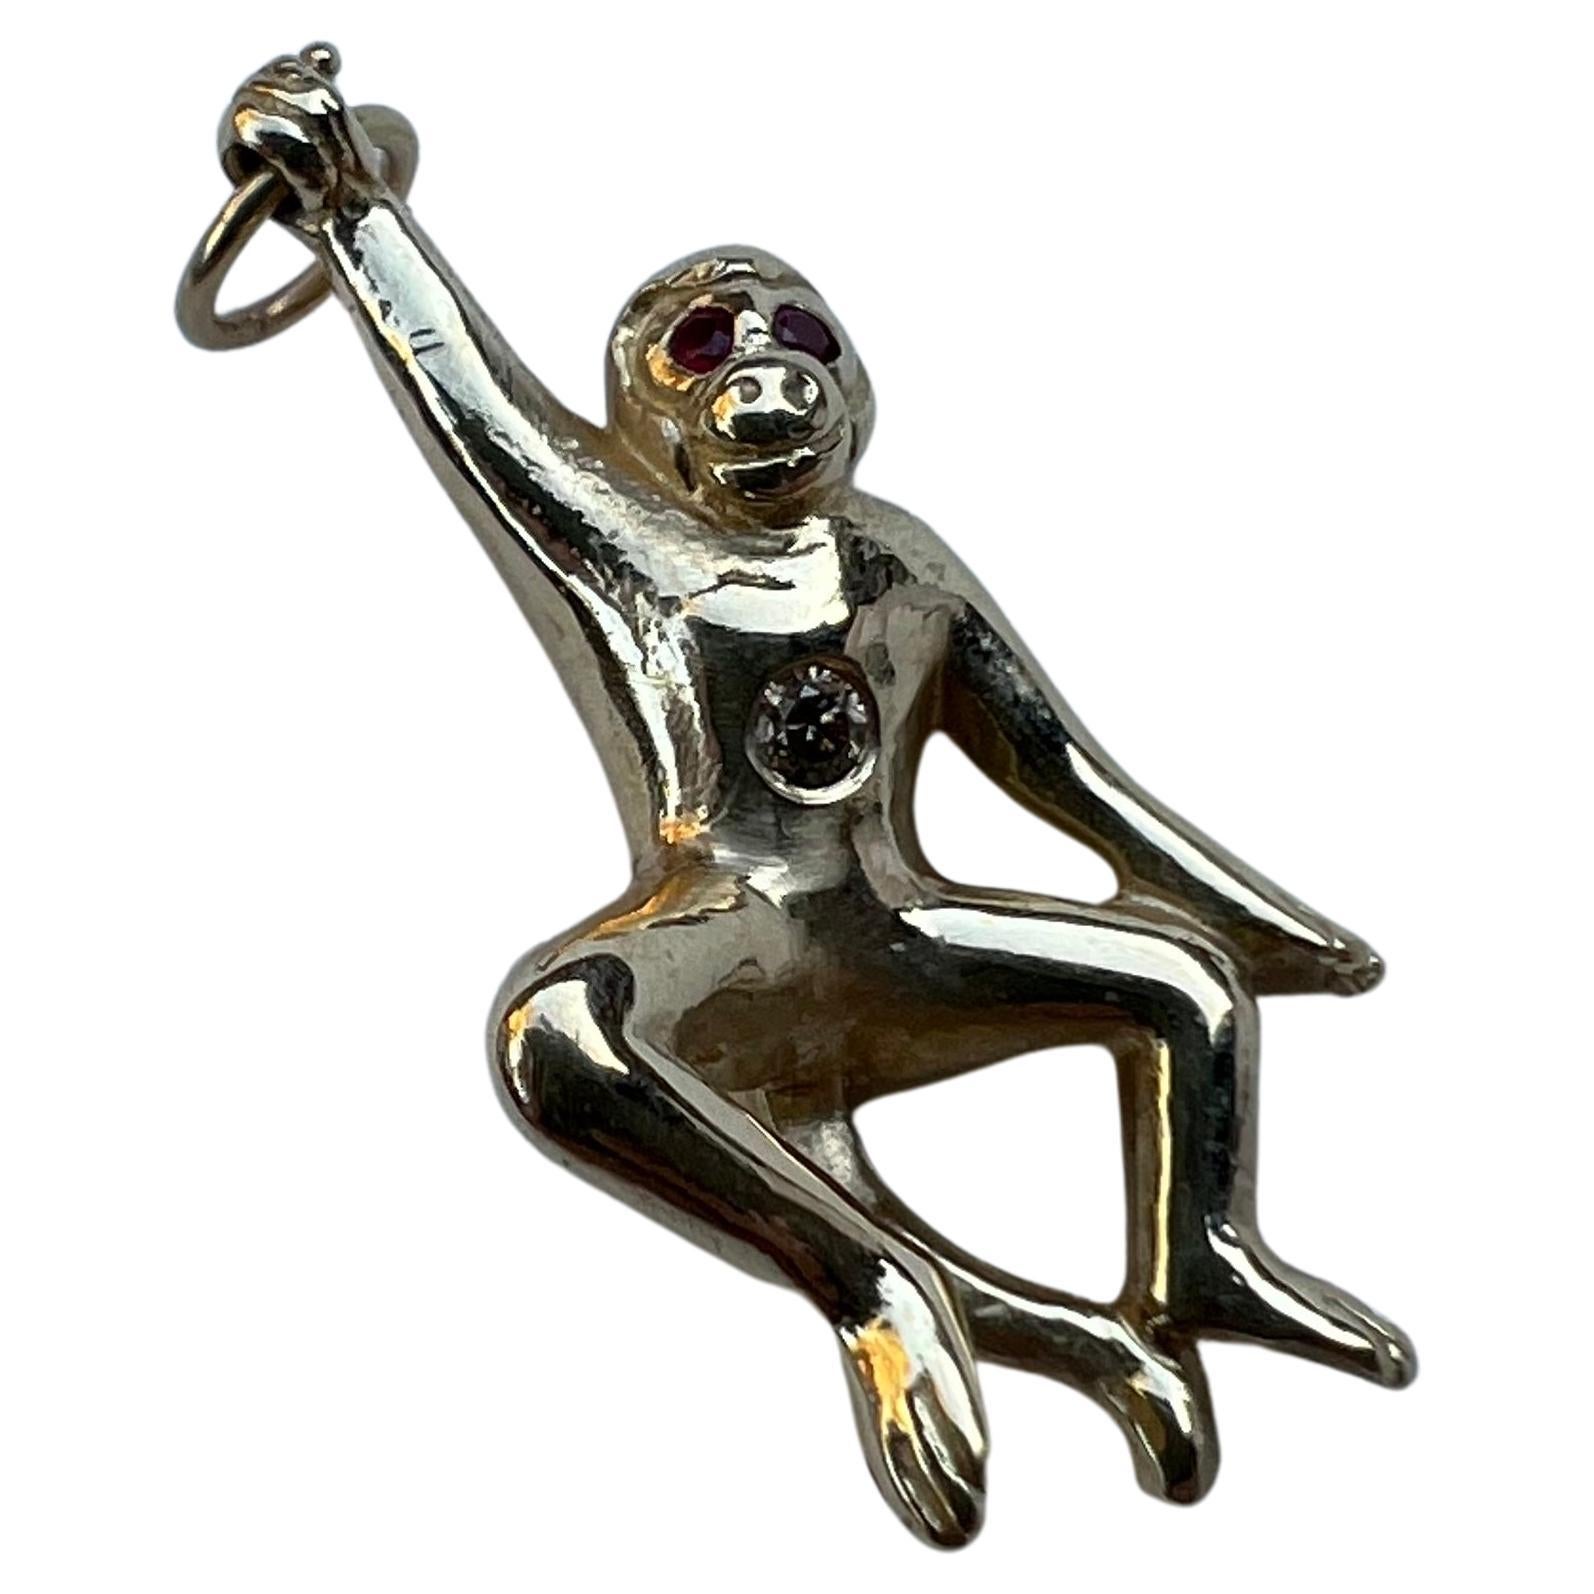 Animal jewelry  Diamond Tummy Ruby Eyes Monkey 14k Solid Gold Pendant By Designer J Dauphin

Hand made in Los Angeles

Can be worn on a chain necklace or bead necklace. Can used as a pendant on either a long necklace or a choker.